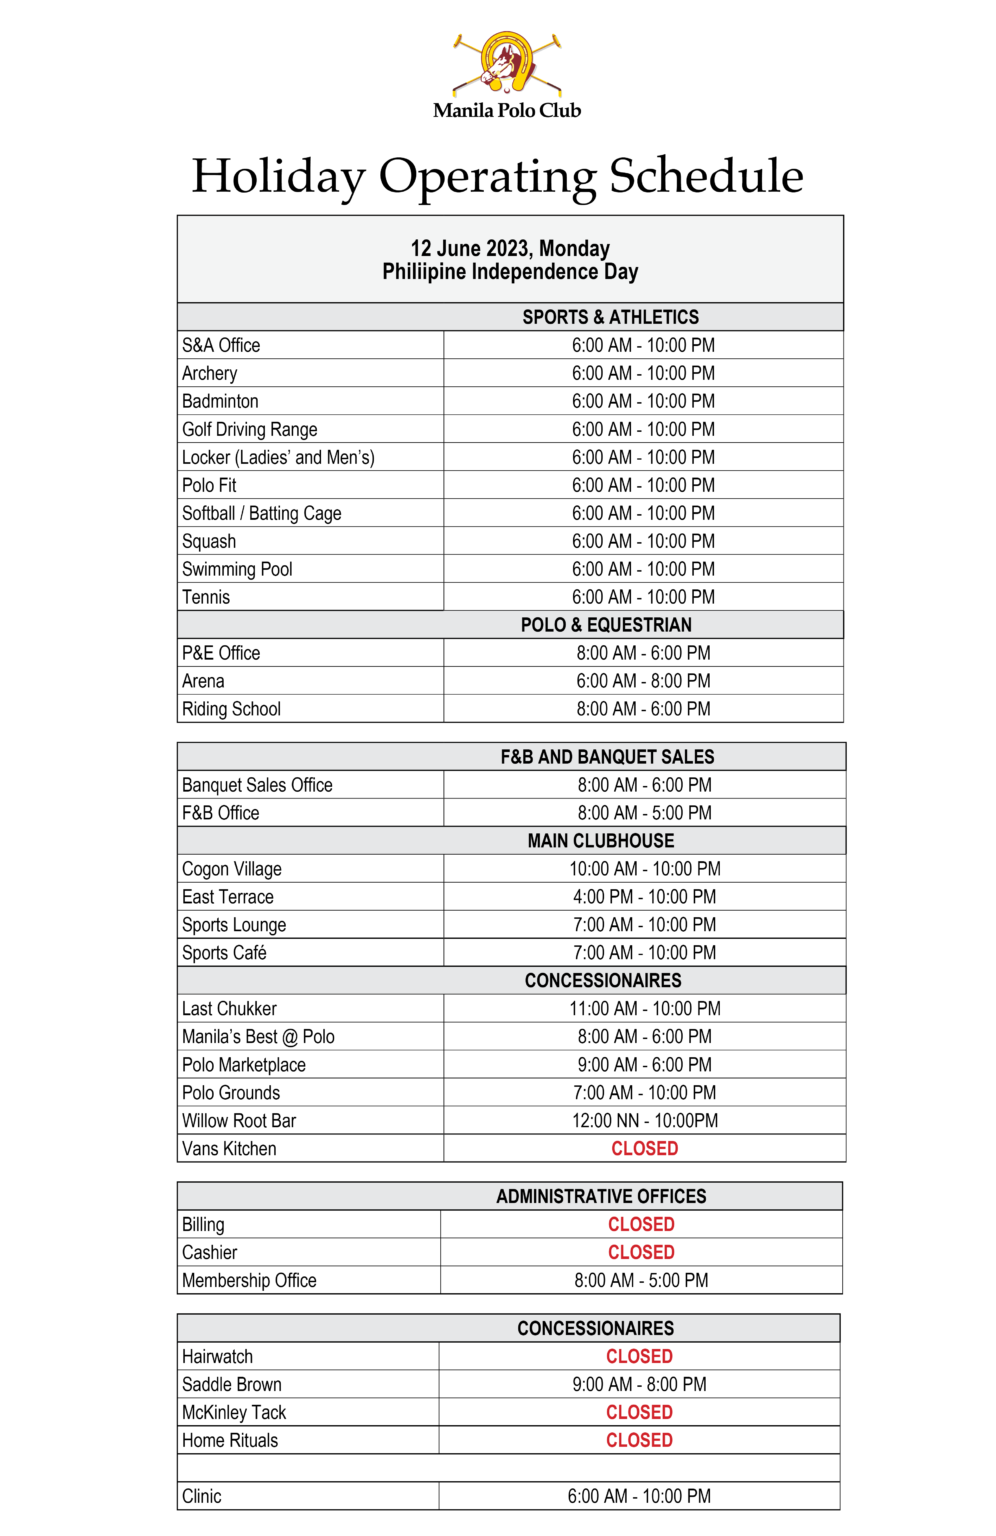 Holiday Operating Schedule Independence Day 2023 Manila Polo Club